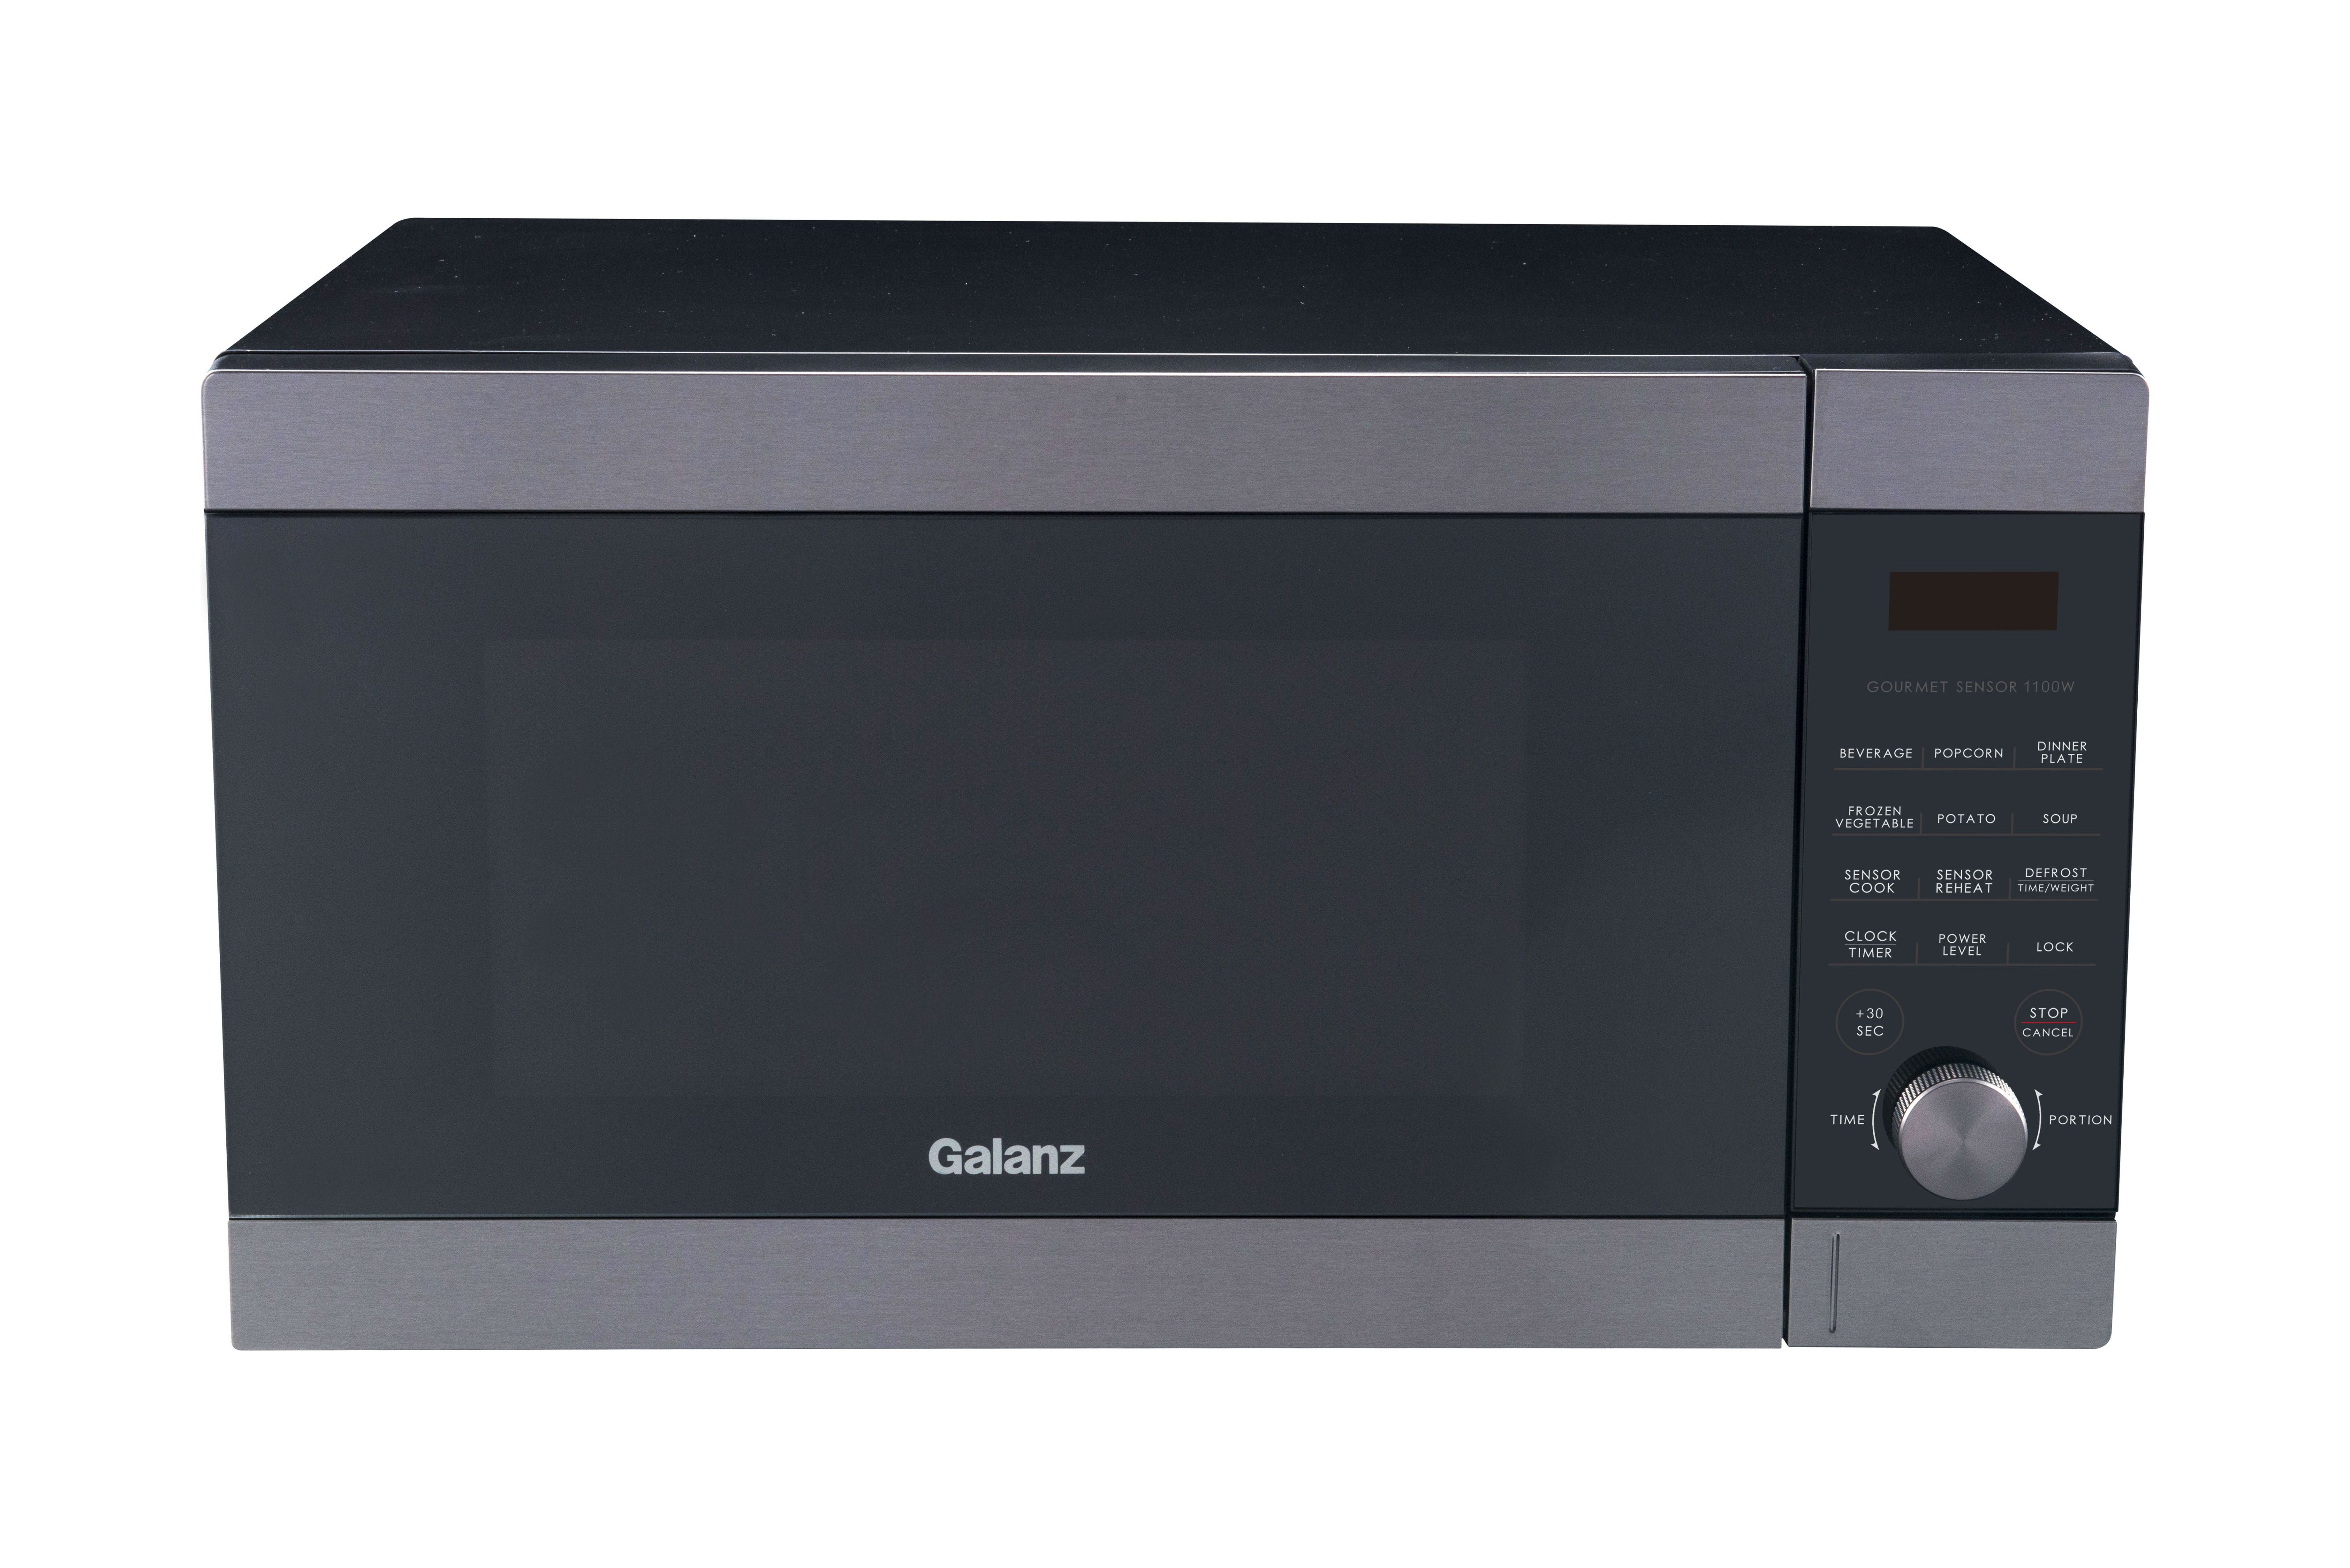 Galanz Express Wave 1.4 Cu ft Sensor Cooking Microwave Oven, Black Stainless Steel, New - image 3 of 9